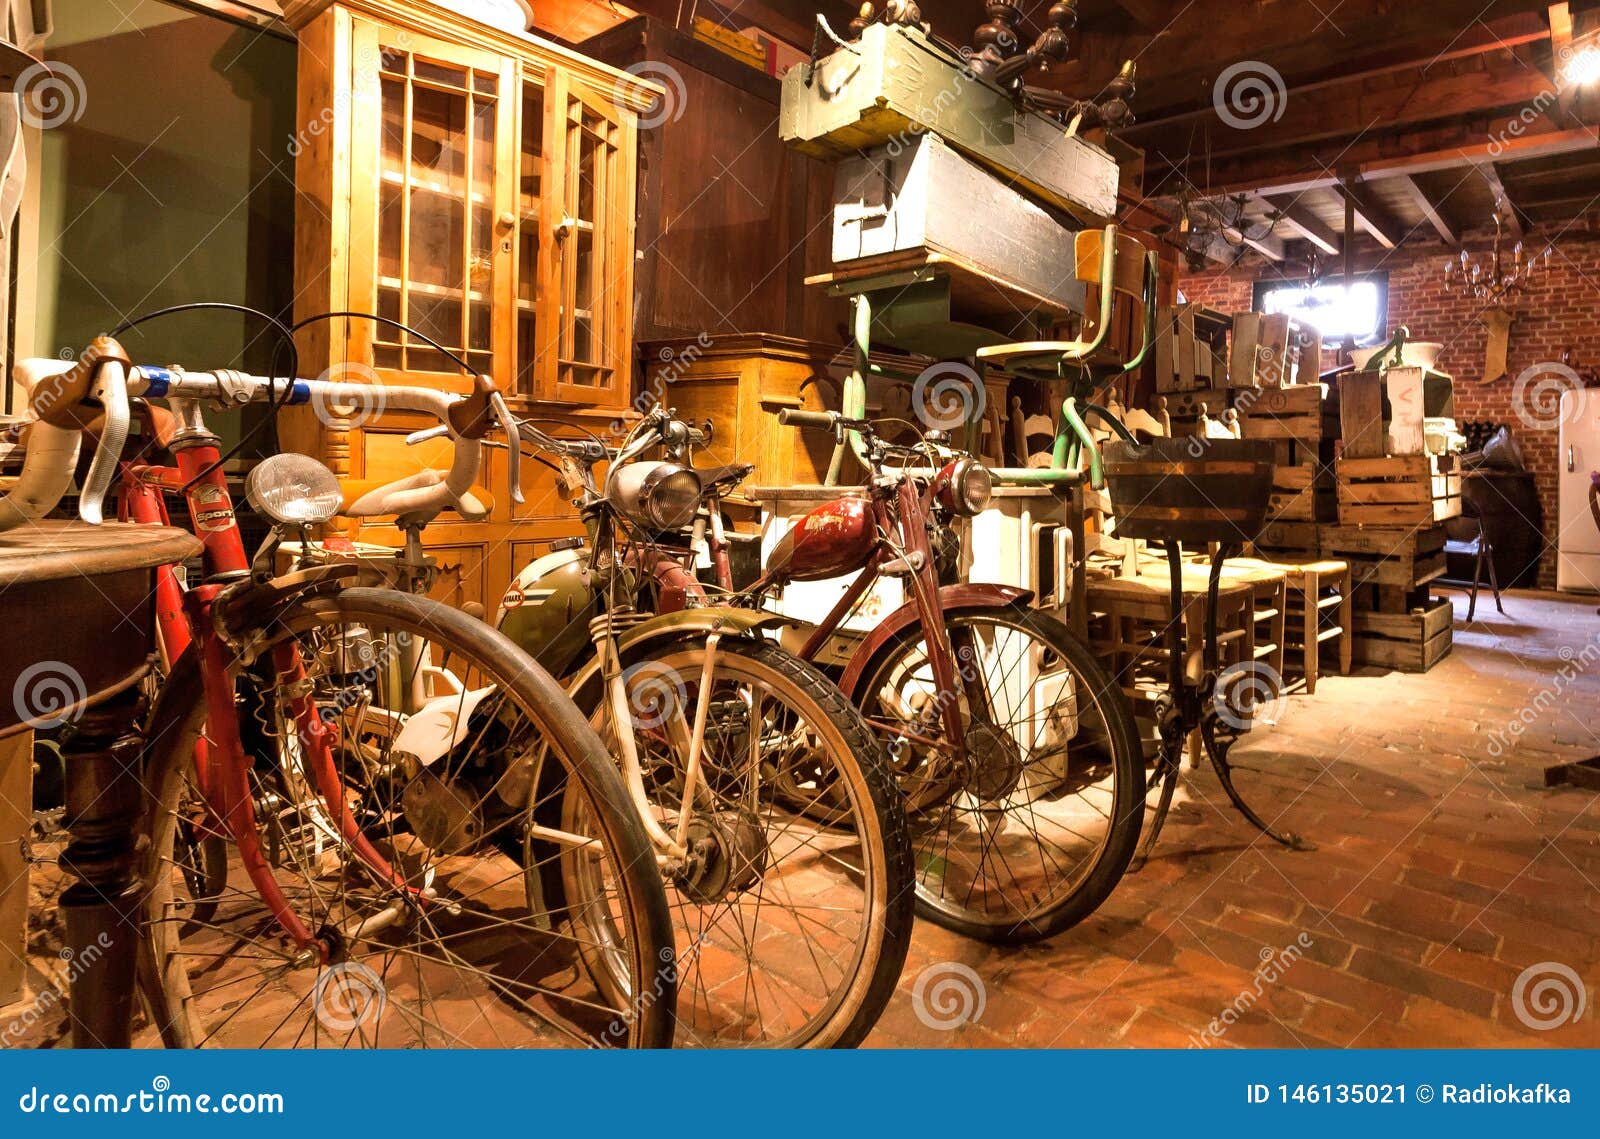 Cycles and Retro Bikes for Sale Inside Antique Store with Many Vintage Utensil, Decor, Wooden Furniture Editorial Photo